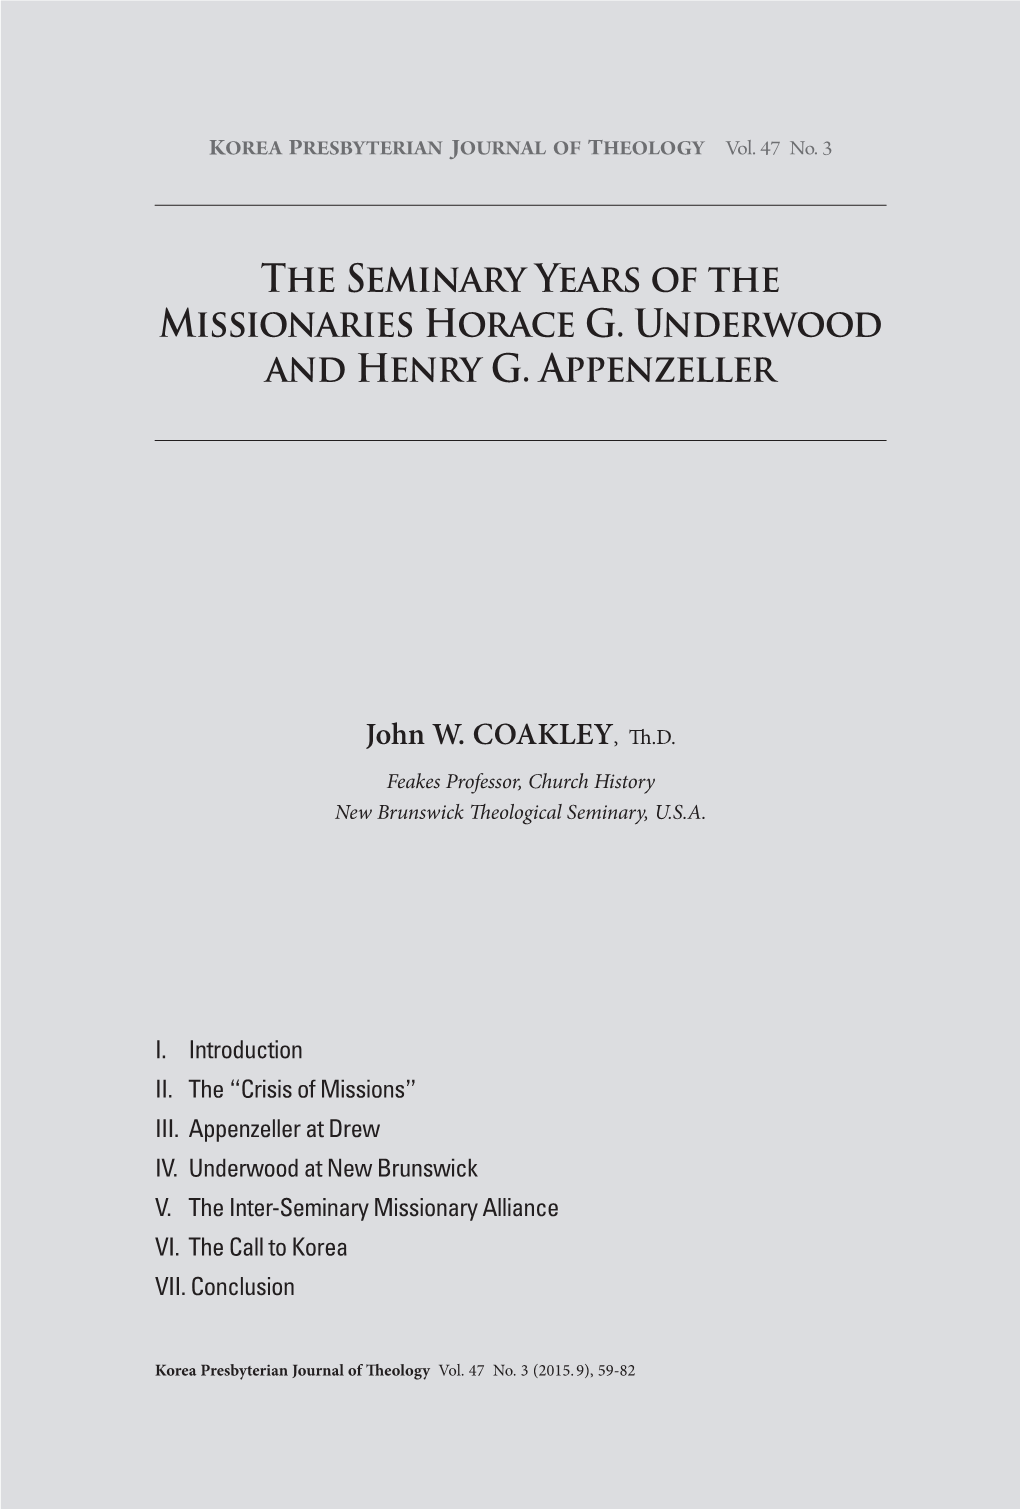 The Seminary Years of the Missionaries Horace G